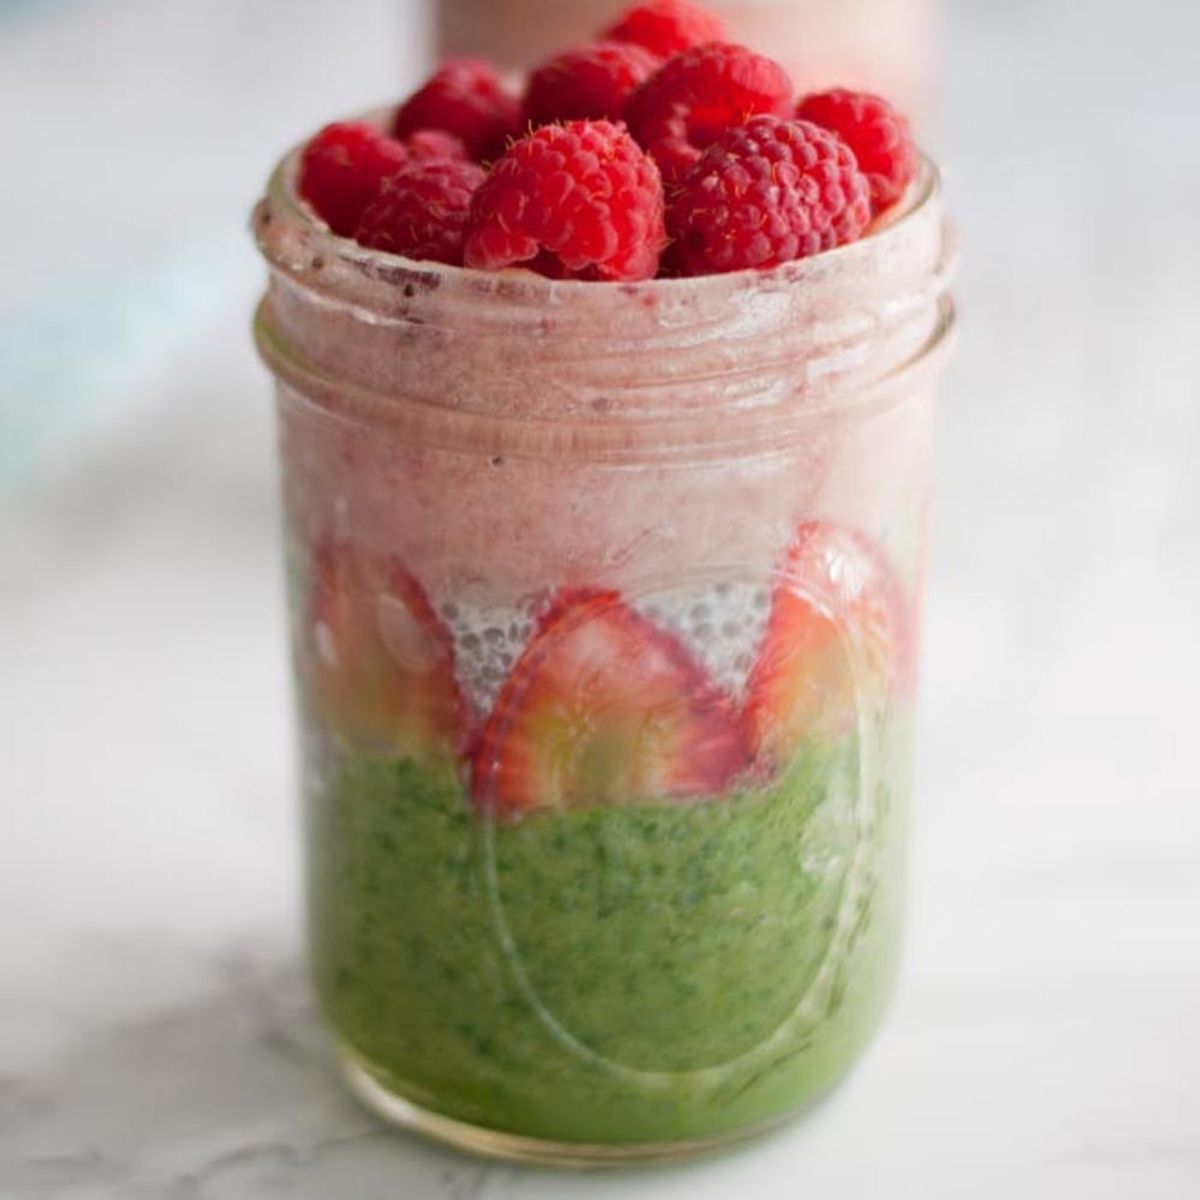 How to Make an Easy Insta-Worthy Layer Smoothie